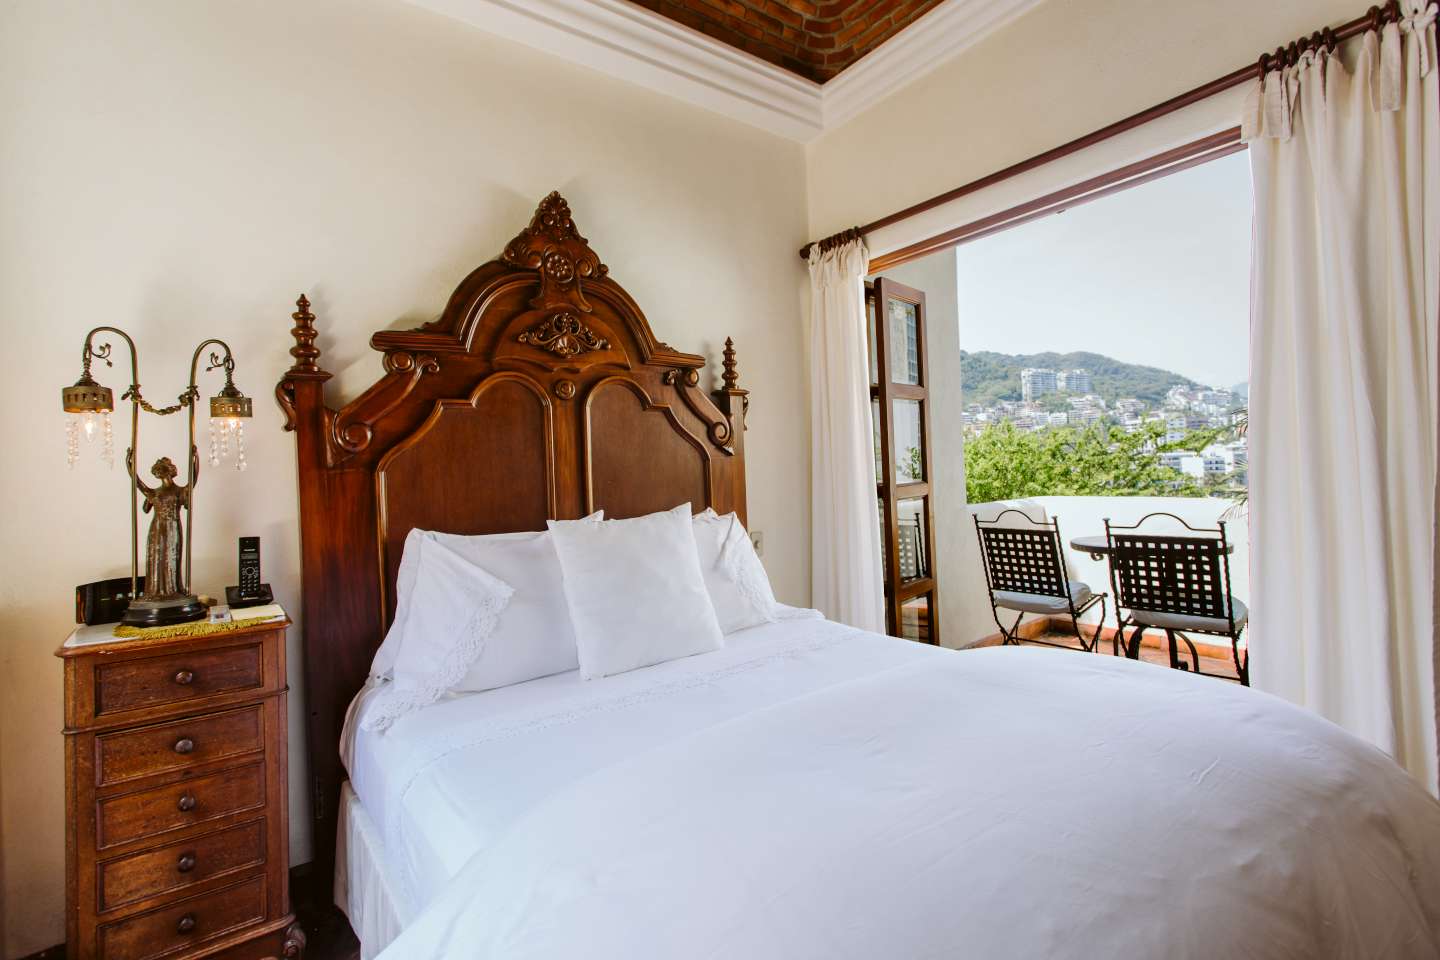 Angels Dome Suite showing its ornate wooden bed with white linen bedding and view of Sierra Madre Mountains